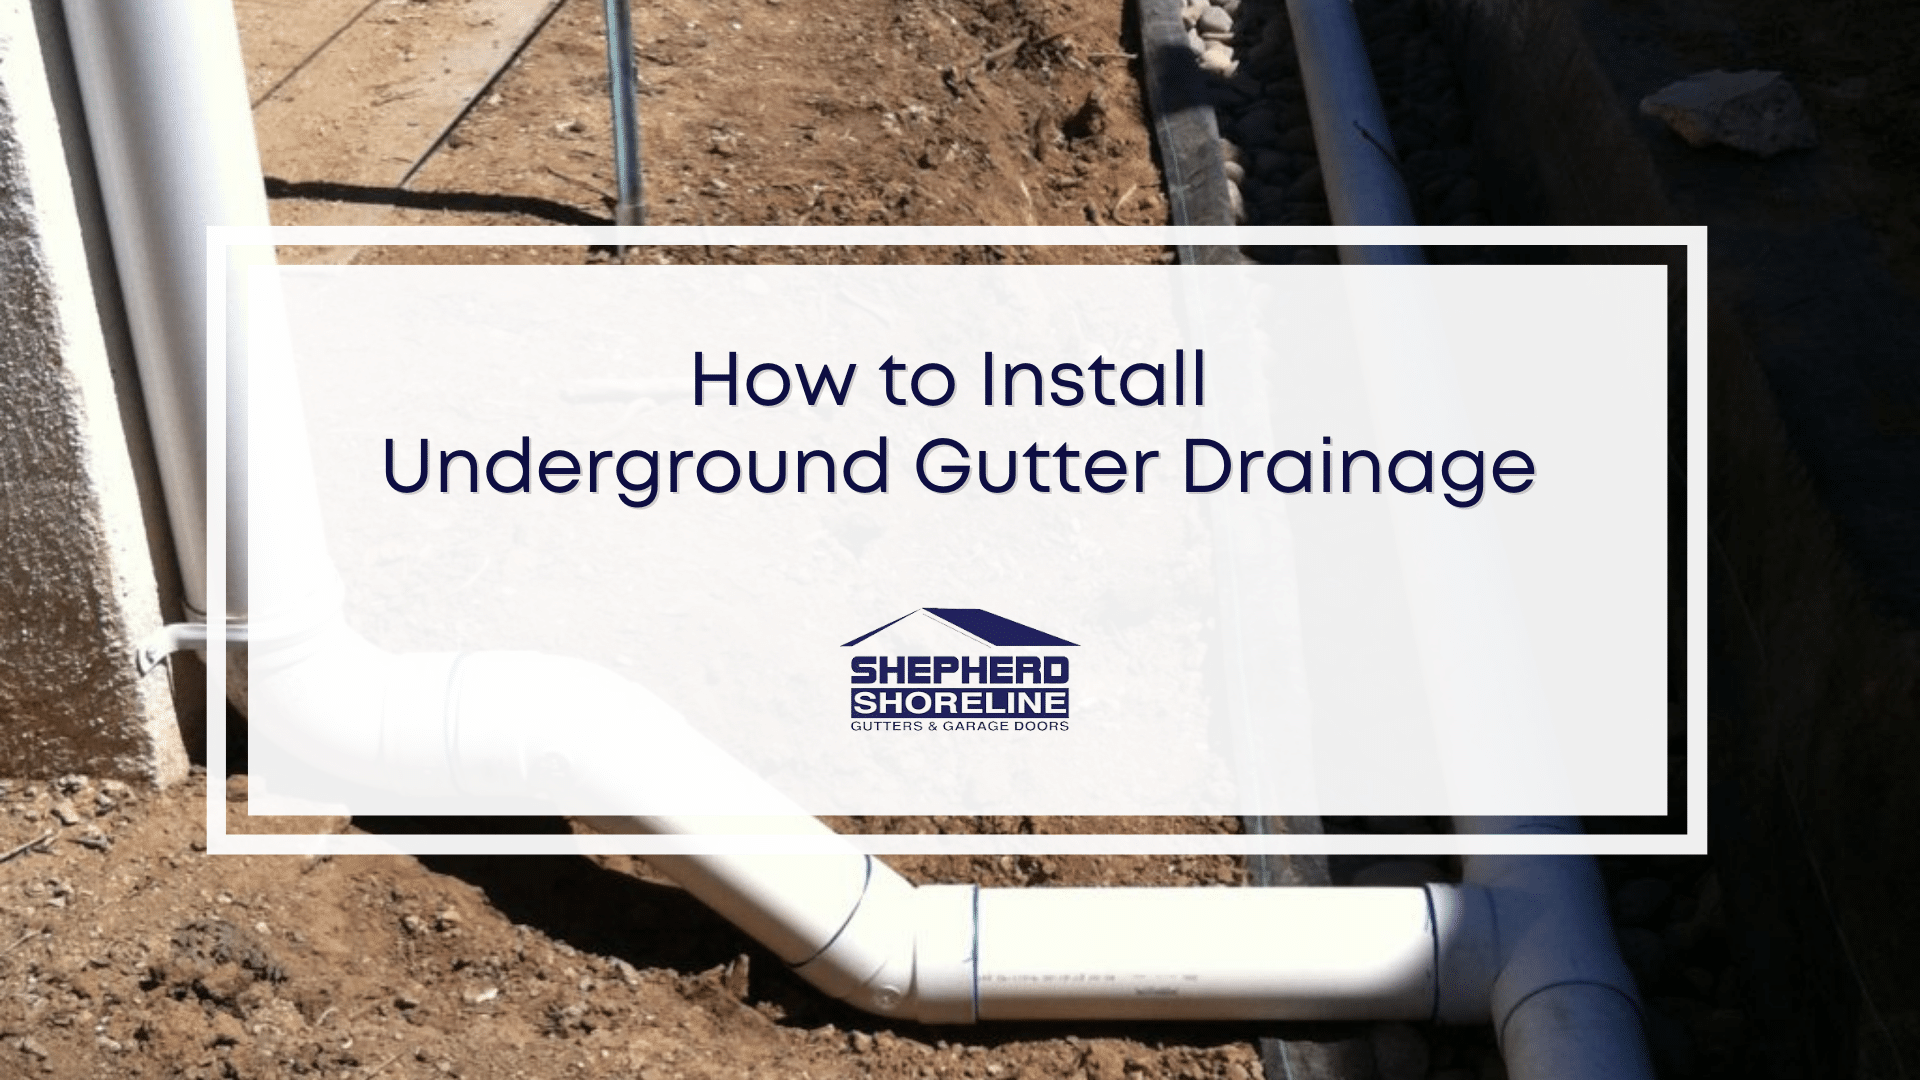 Featured image of how to install underground gutter drainage